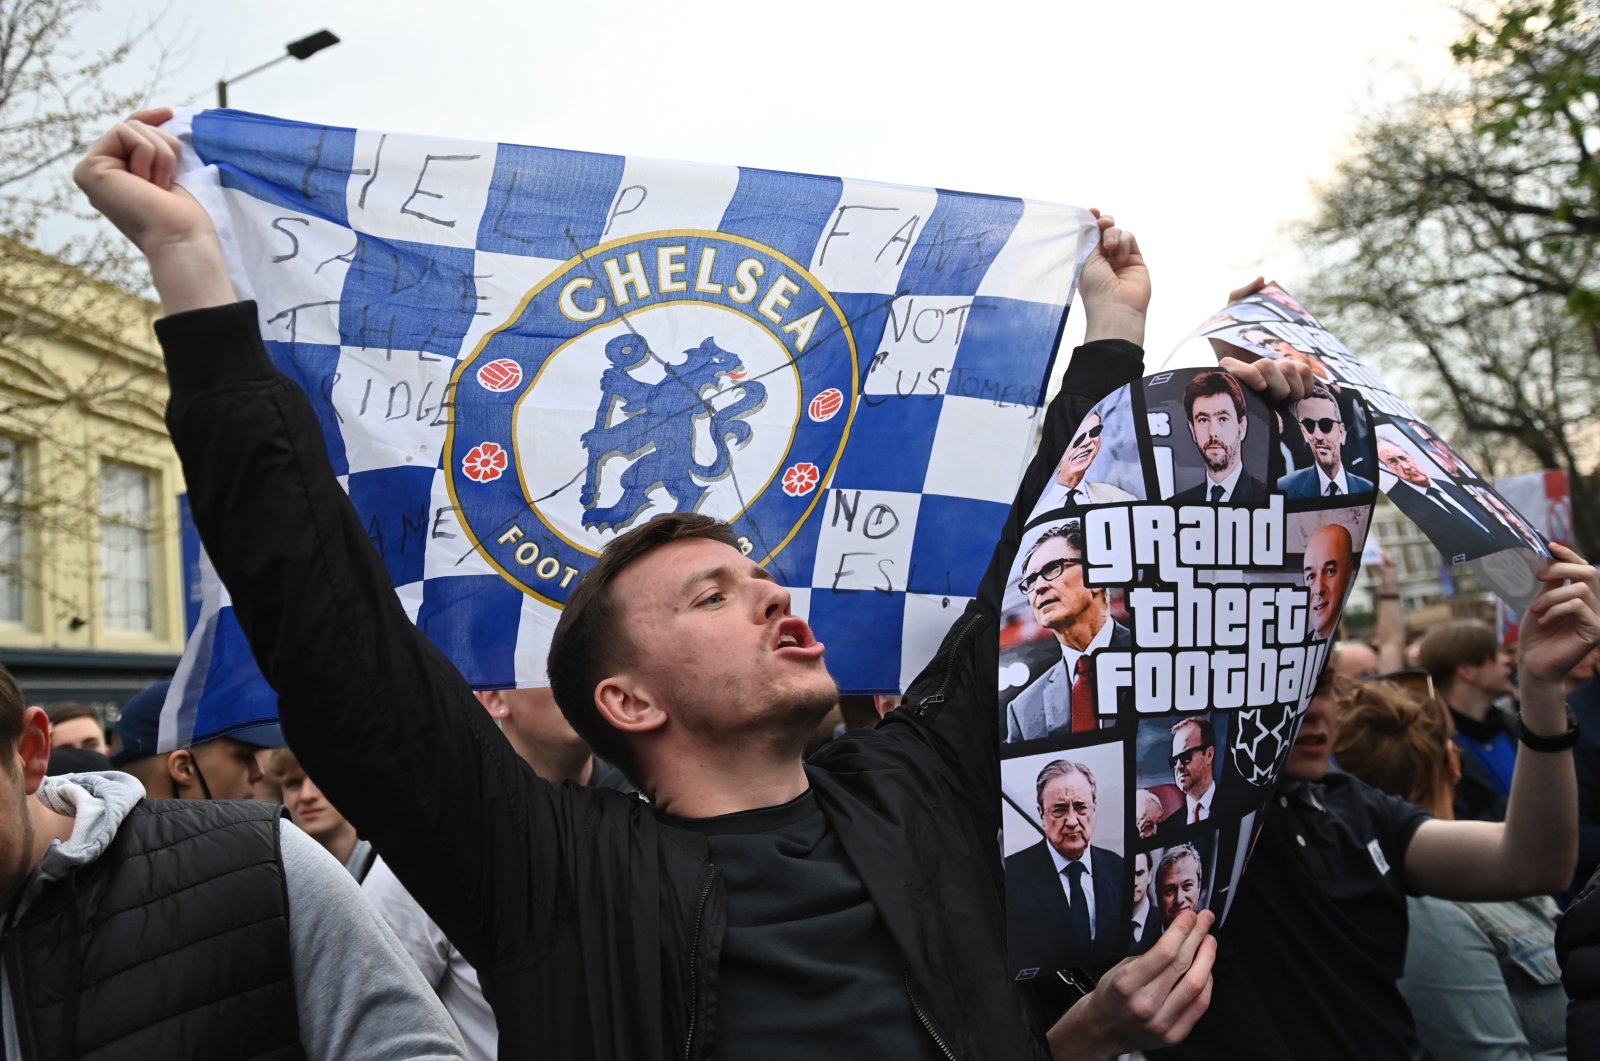 Chelsea fans stage a demonstration against the European Super league before the English Premier League soccer match between Chelsea FC and Brighton & Hove Albion FC in London, Britain, April 20, 2021. (EPA Photo)